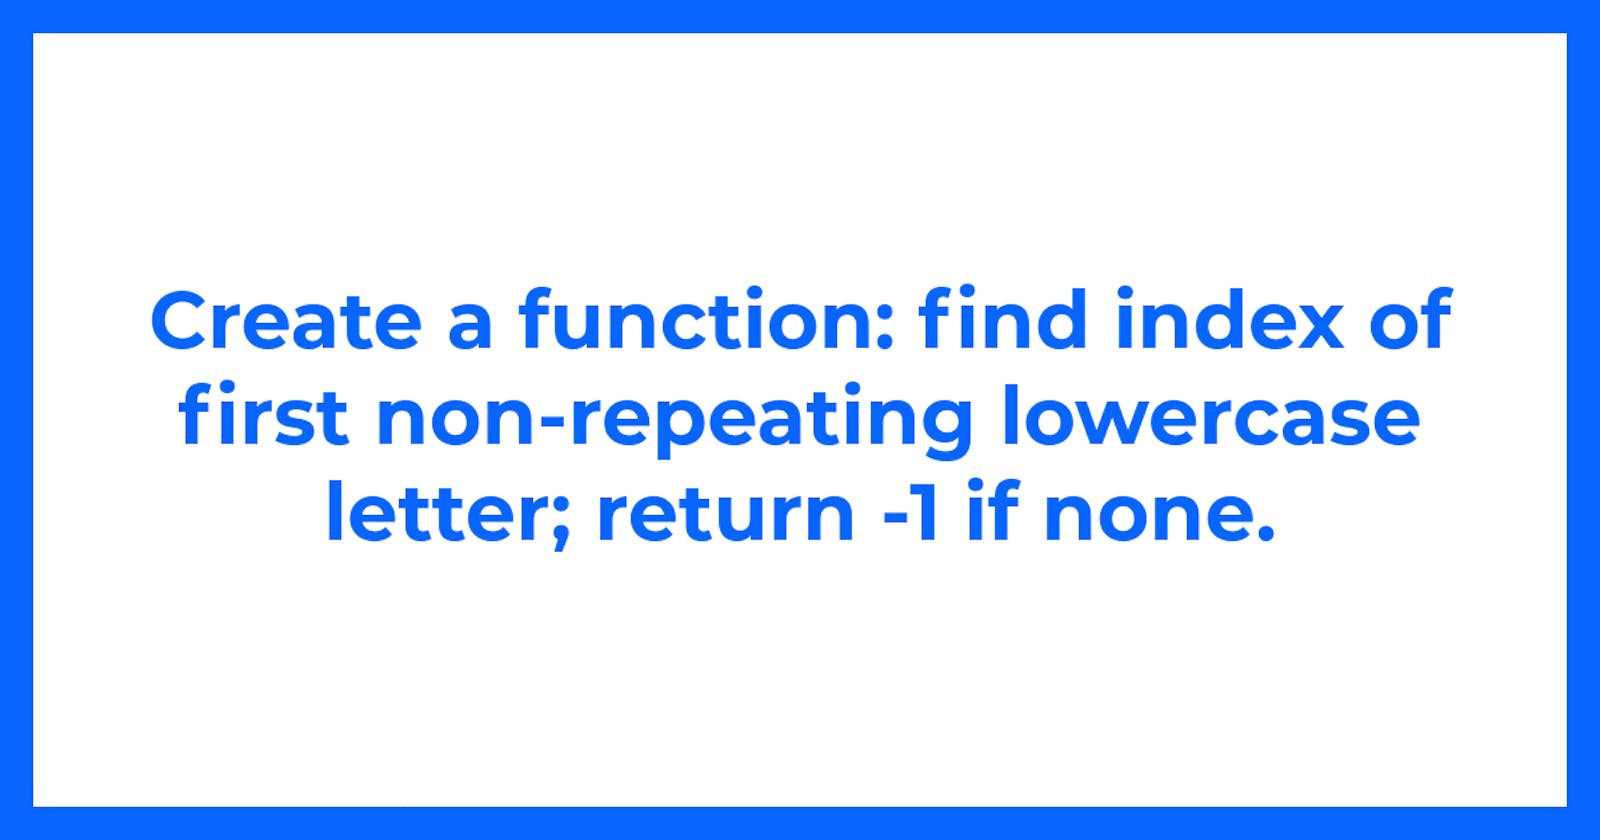 Create a function: find index of first non-repeating lowercase letter; return -1 if none.